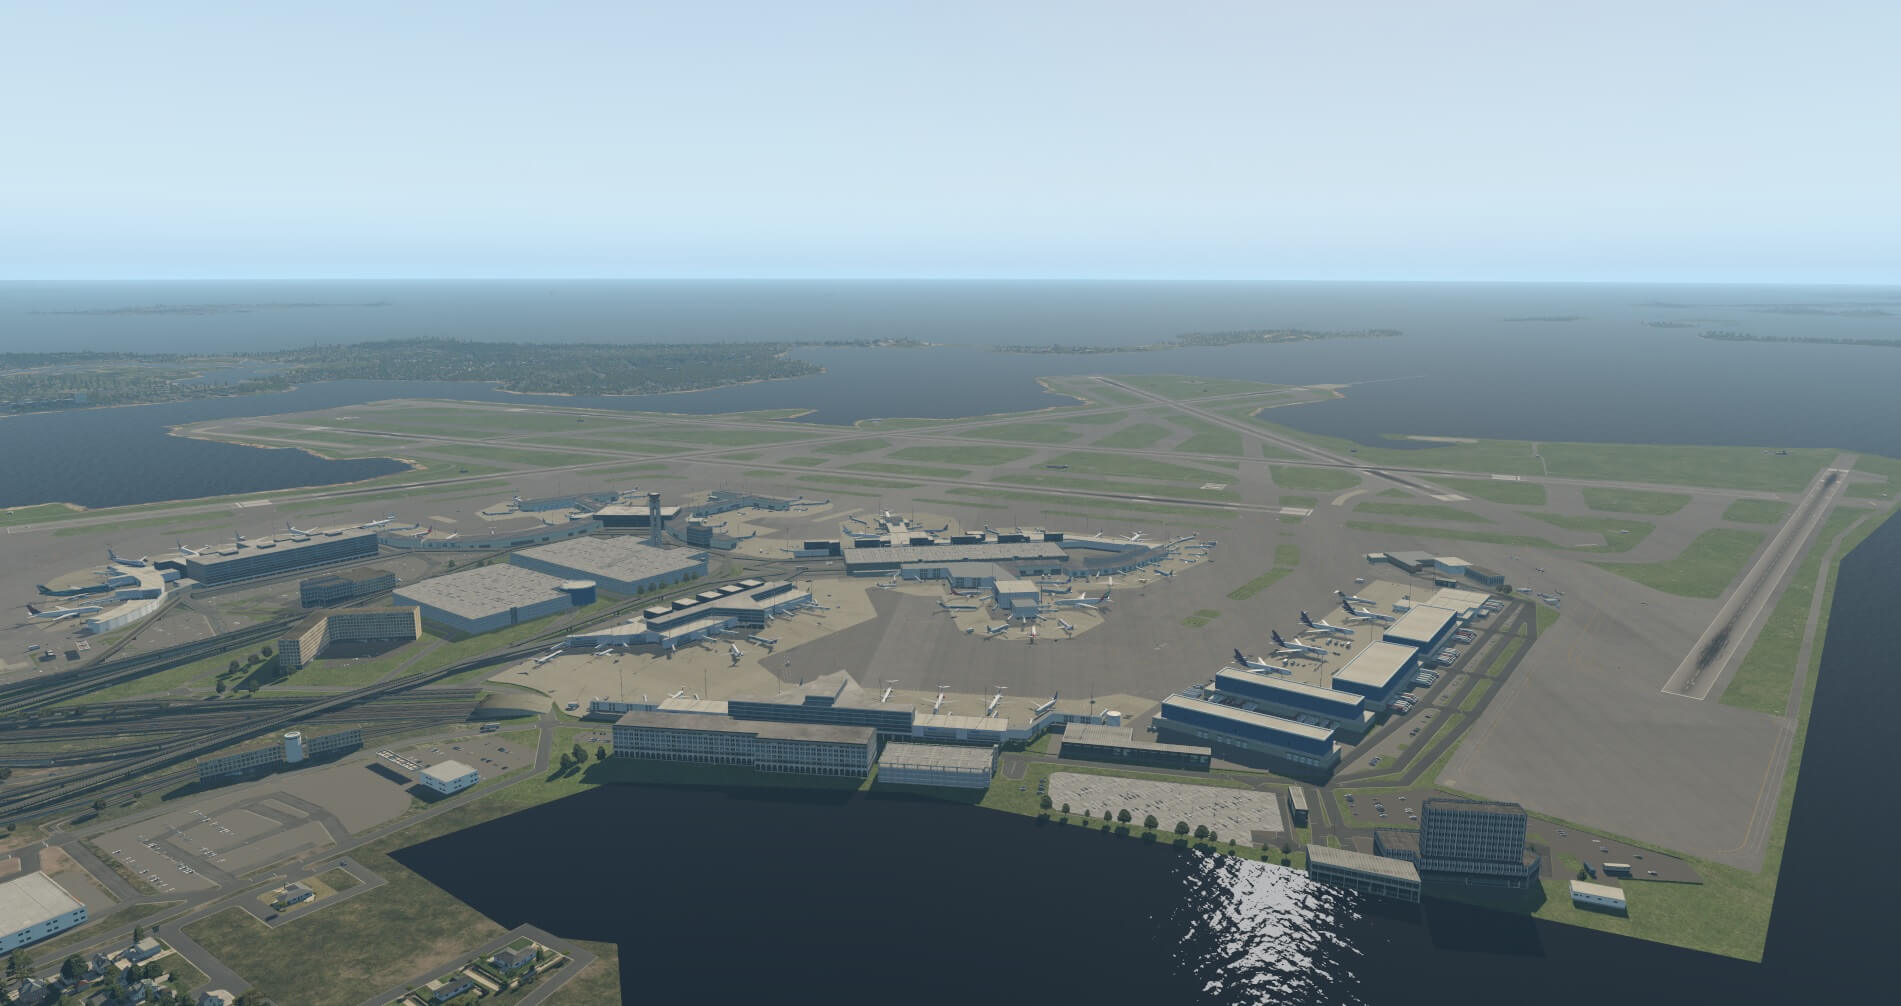 KBOS X-Plane 11.10 from above